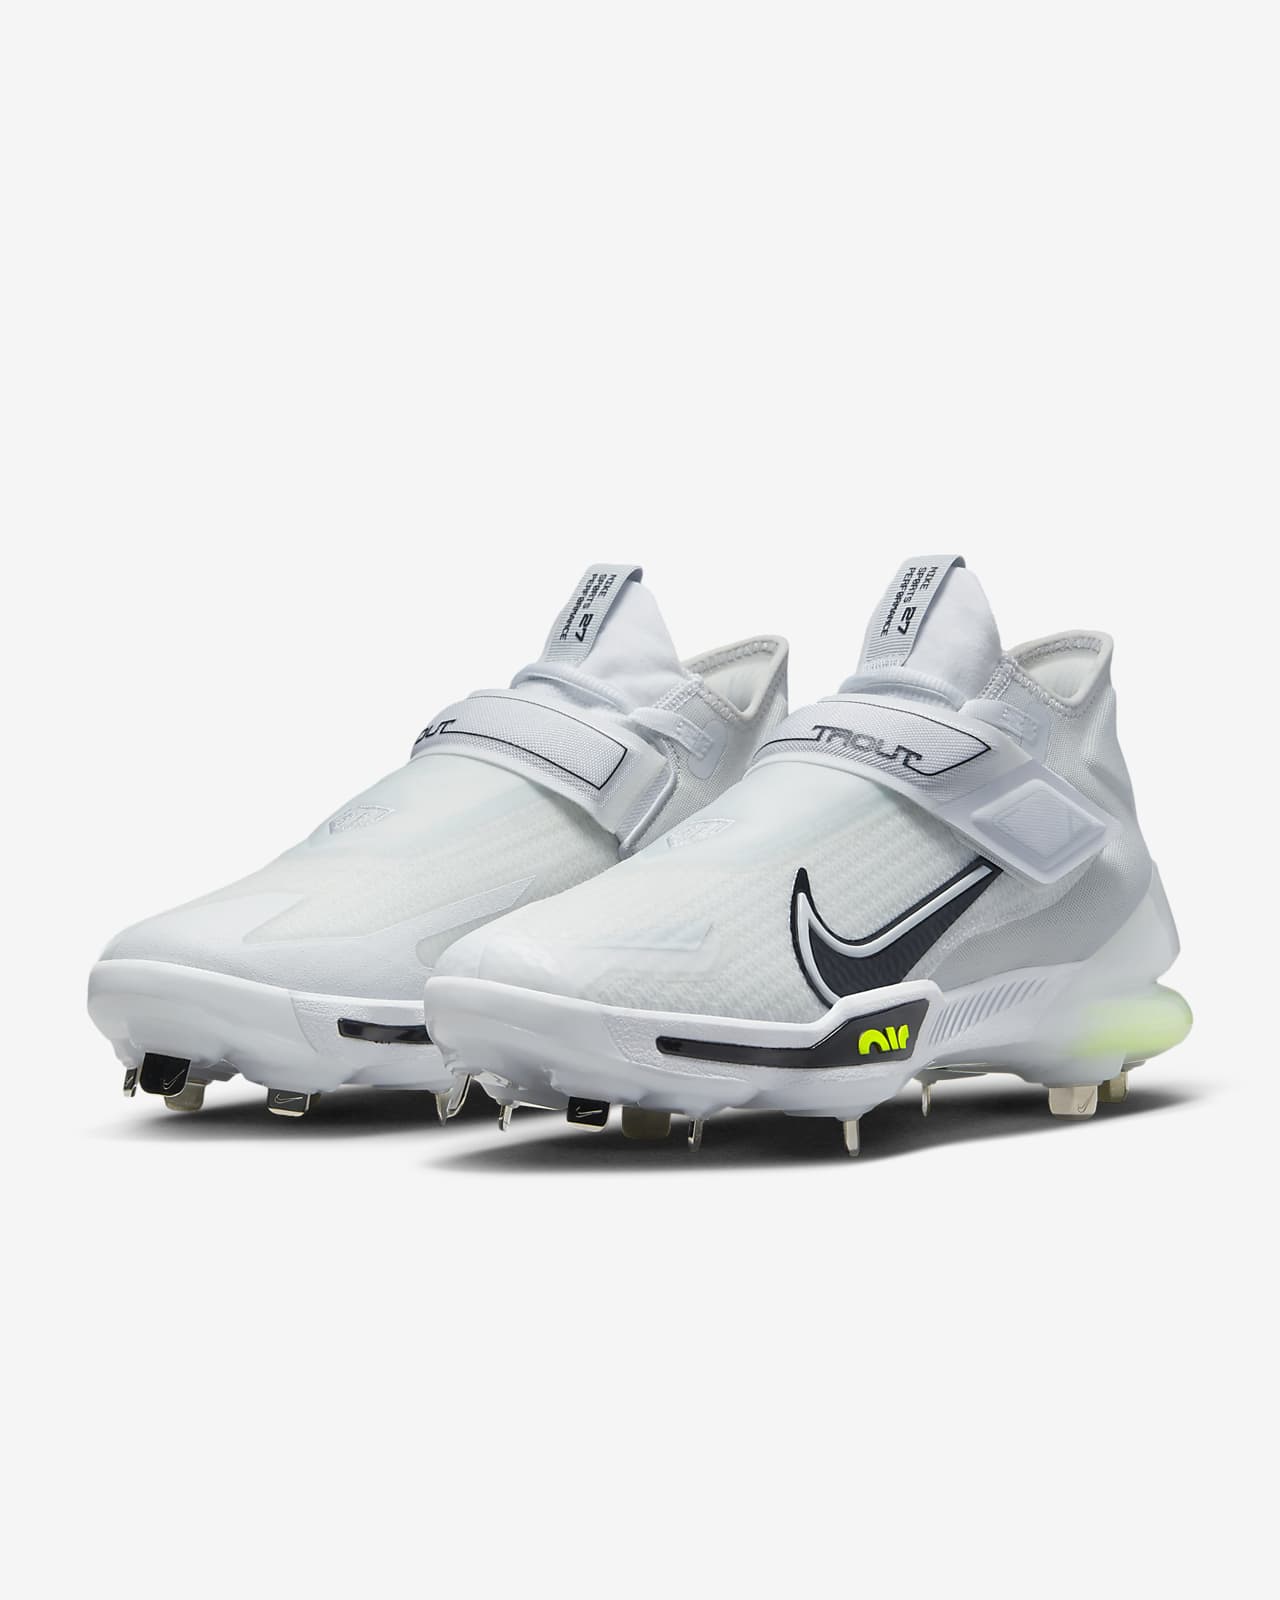 Men's 8.0 (W 9.0) Metal Nike Trout 27 Airzoom Cleat Height Footwear